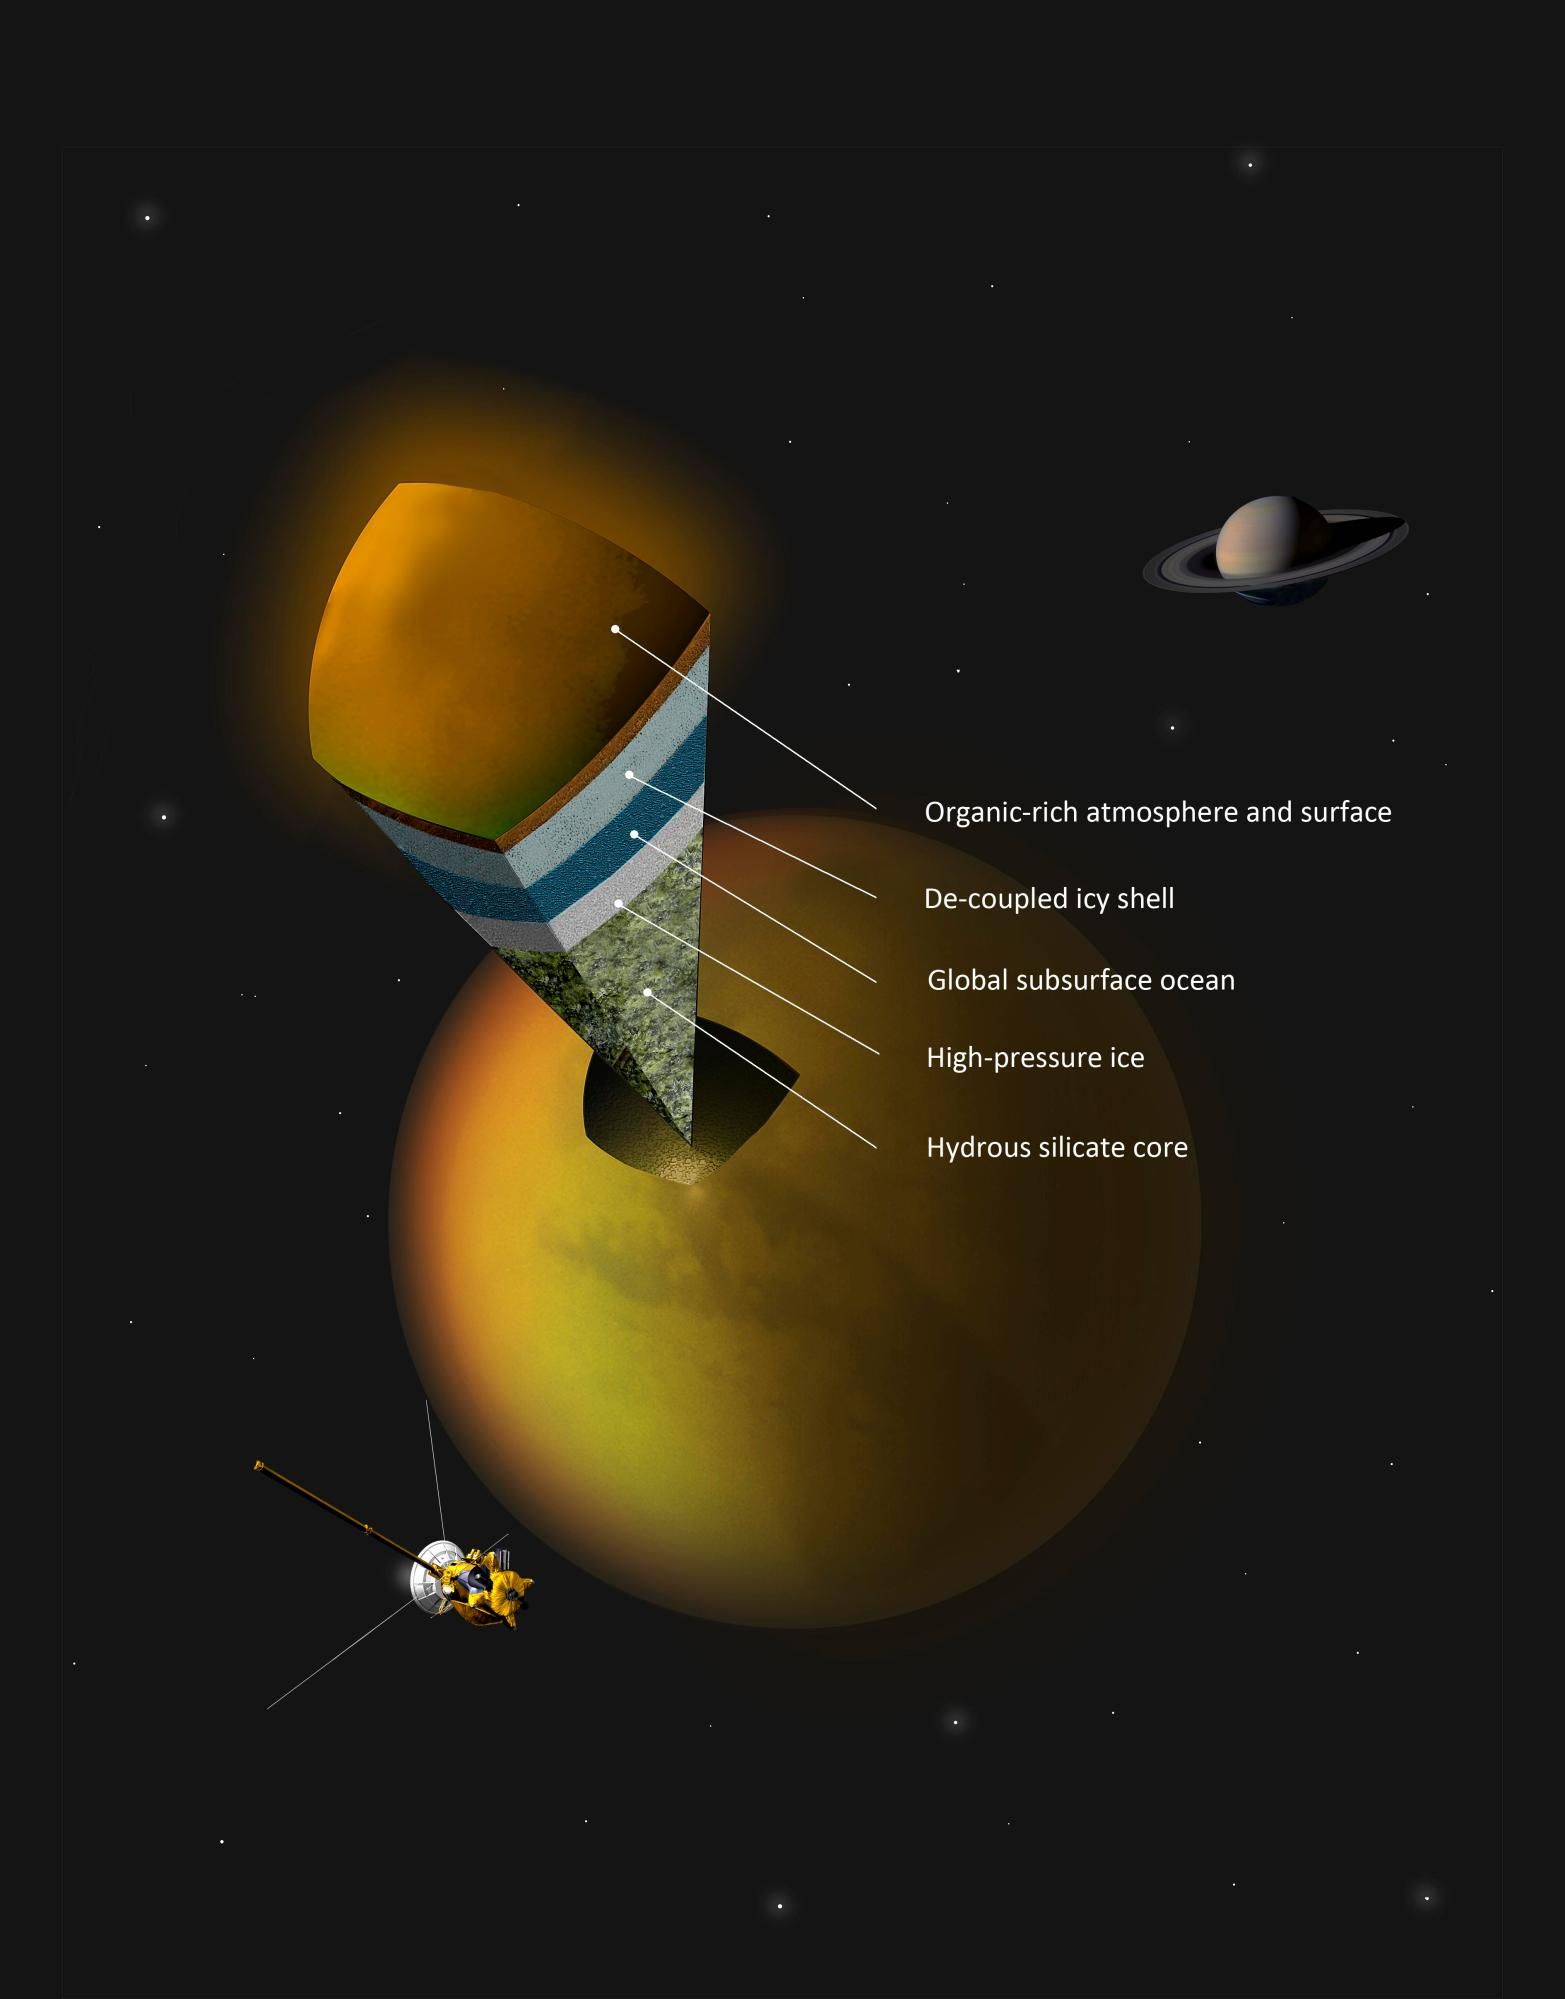 This artist’s concept shows a possible scenario for the internal structure of Titan, as suggested by data from NASA’s Cassini spacecraft.